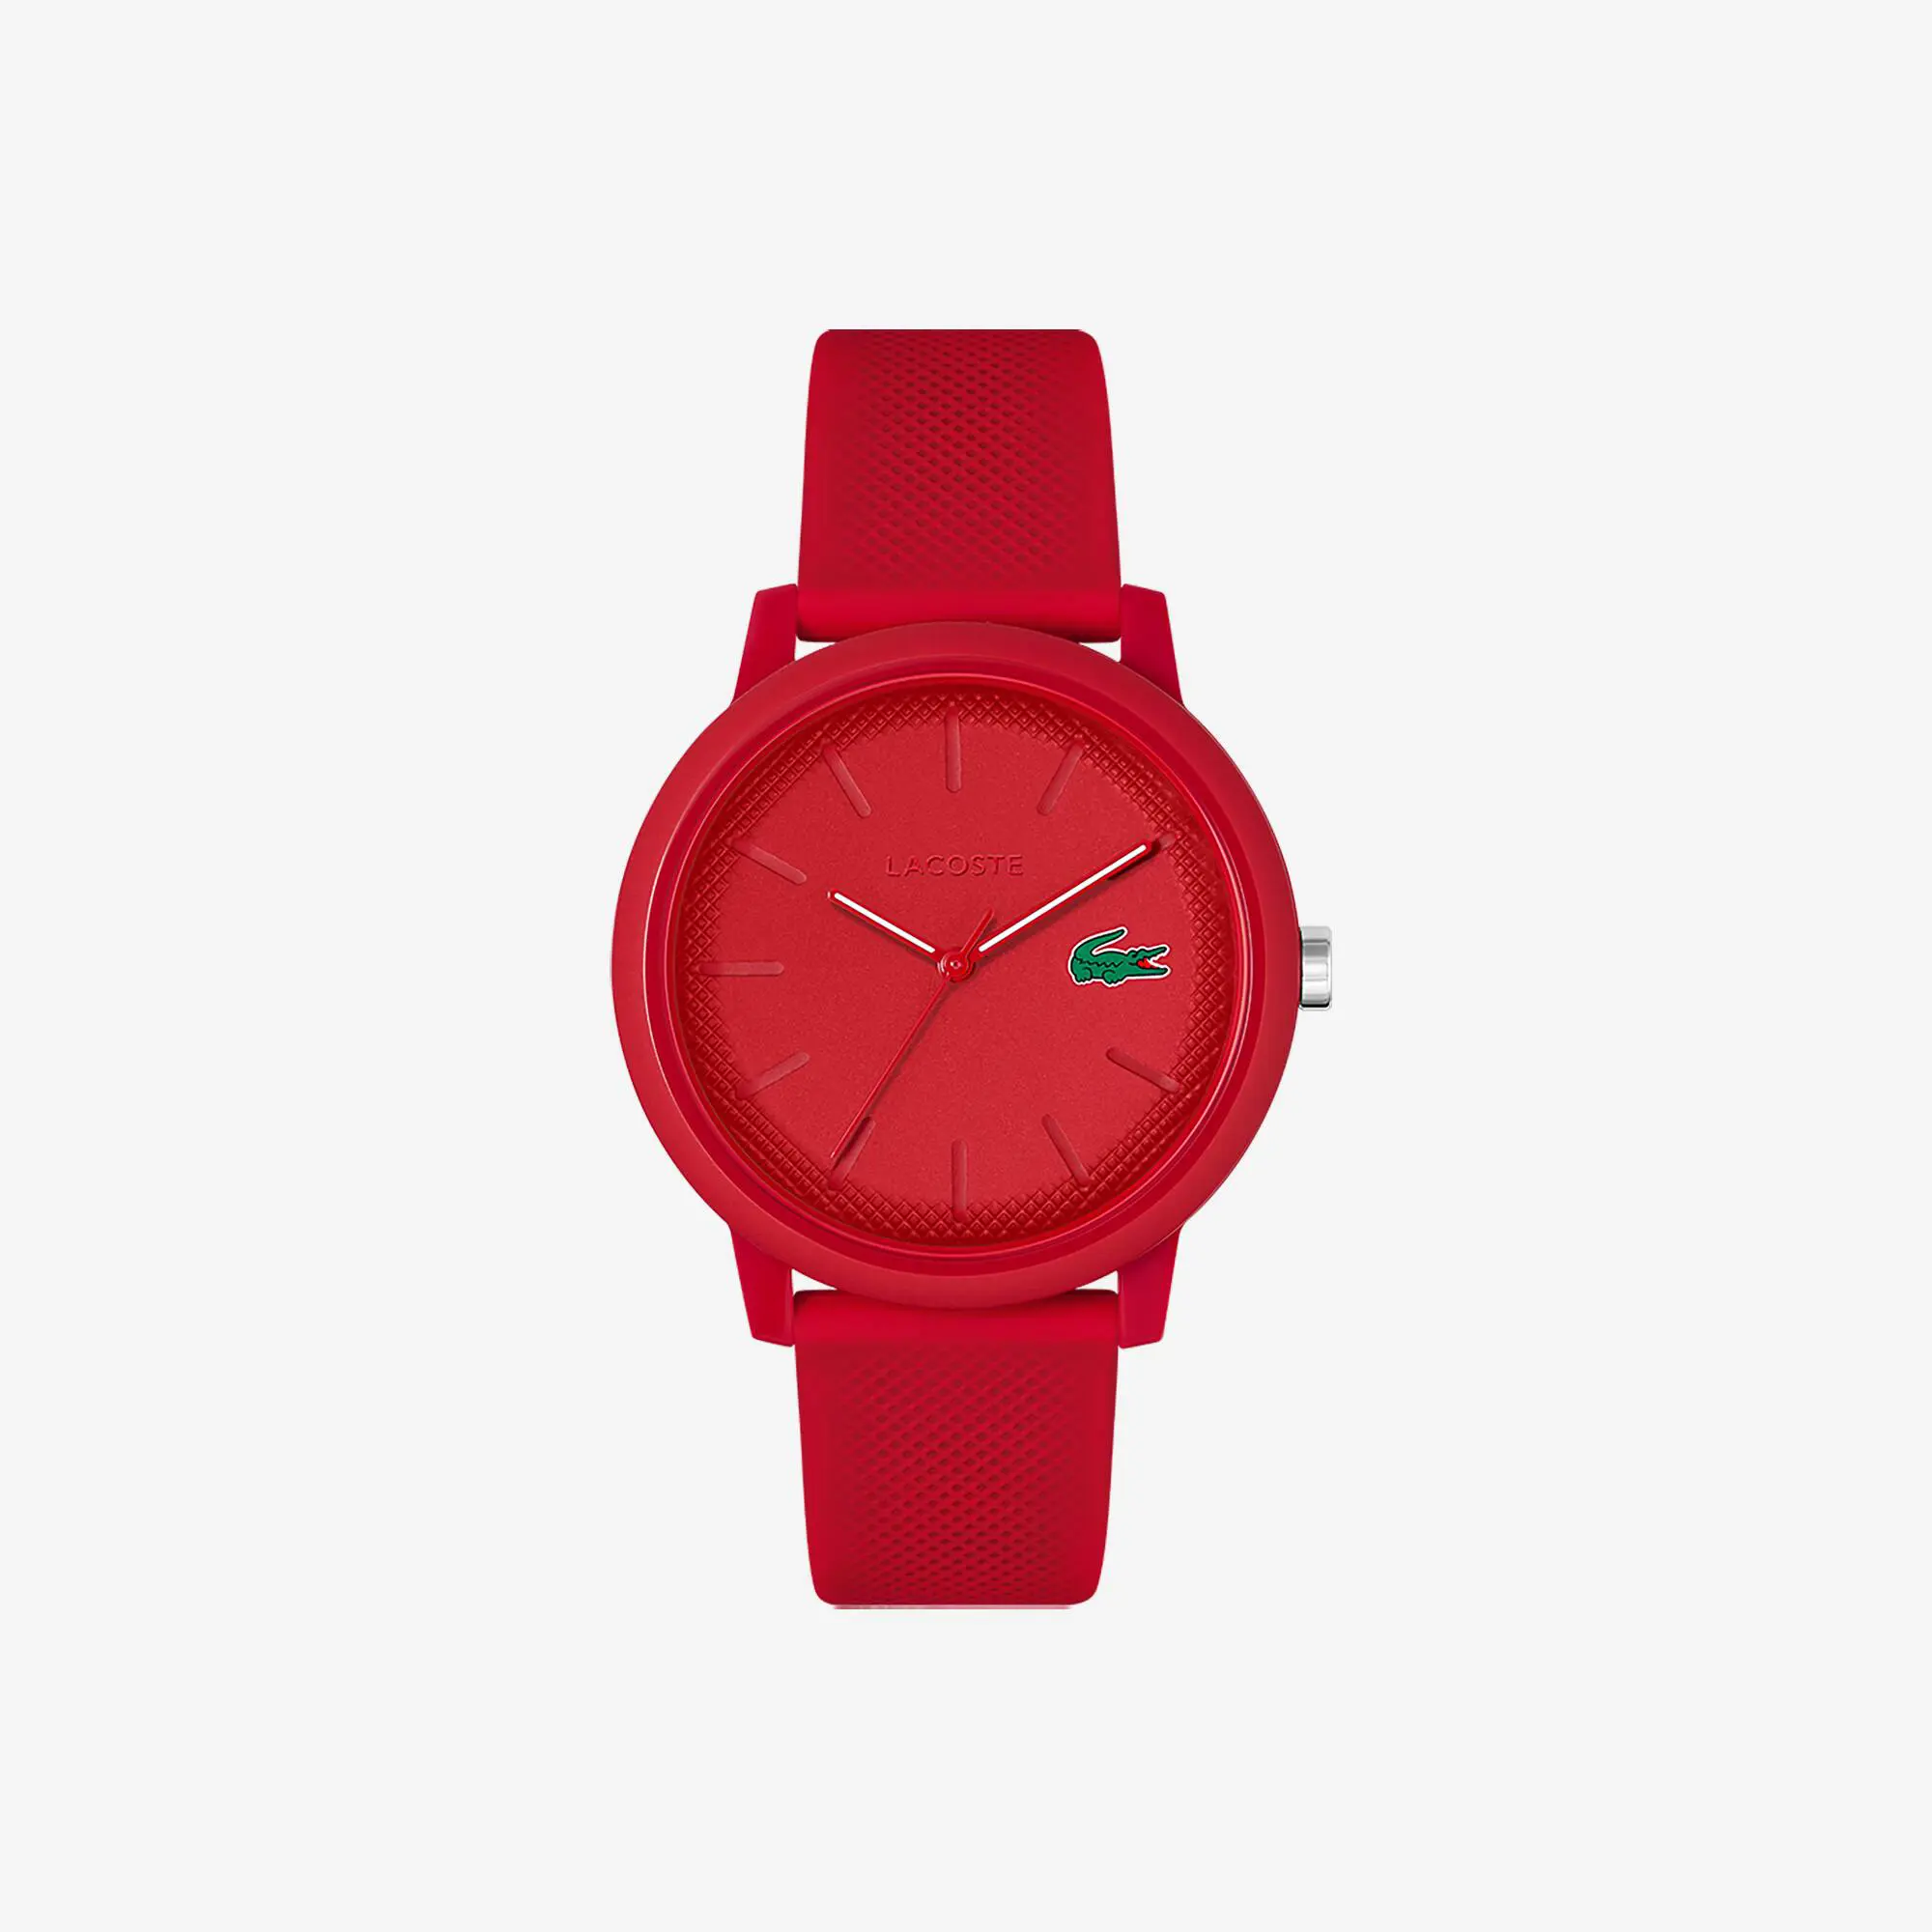 Lacoste Men’s Lacoste.12.12 Red Silicone Strap Watch. 1